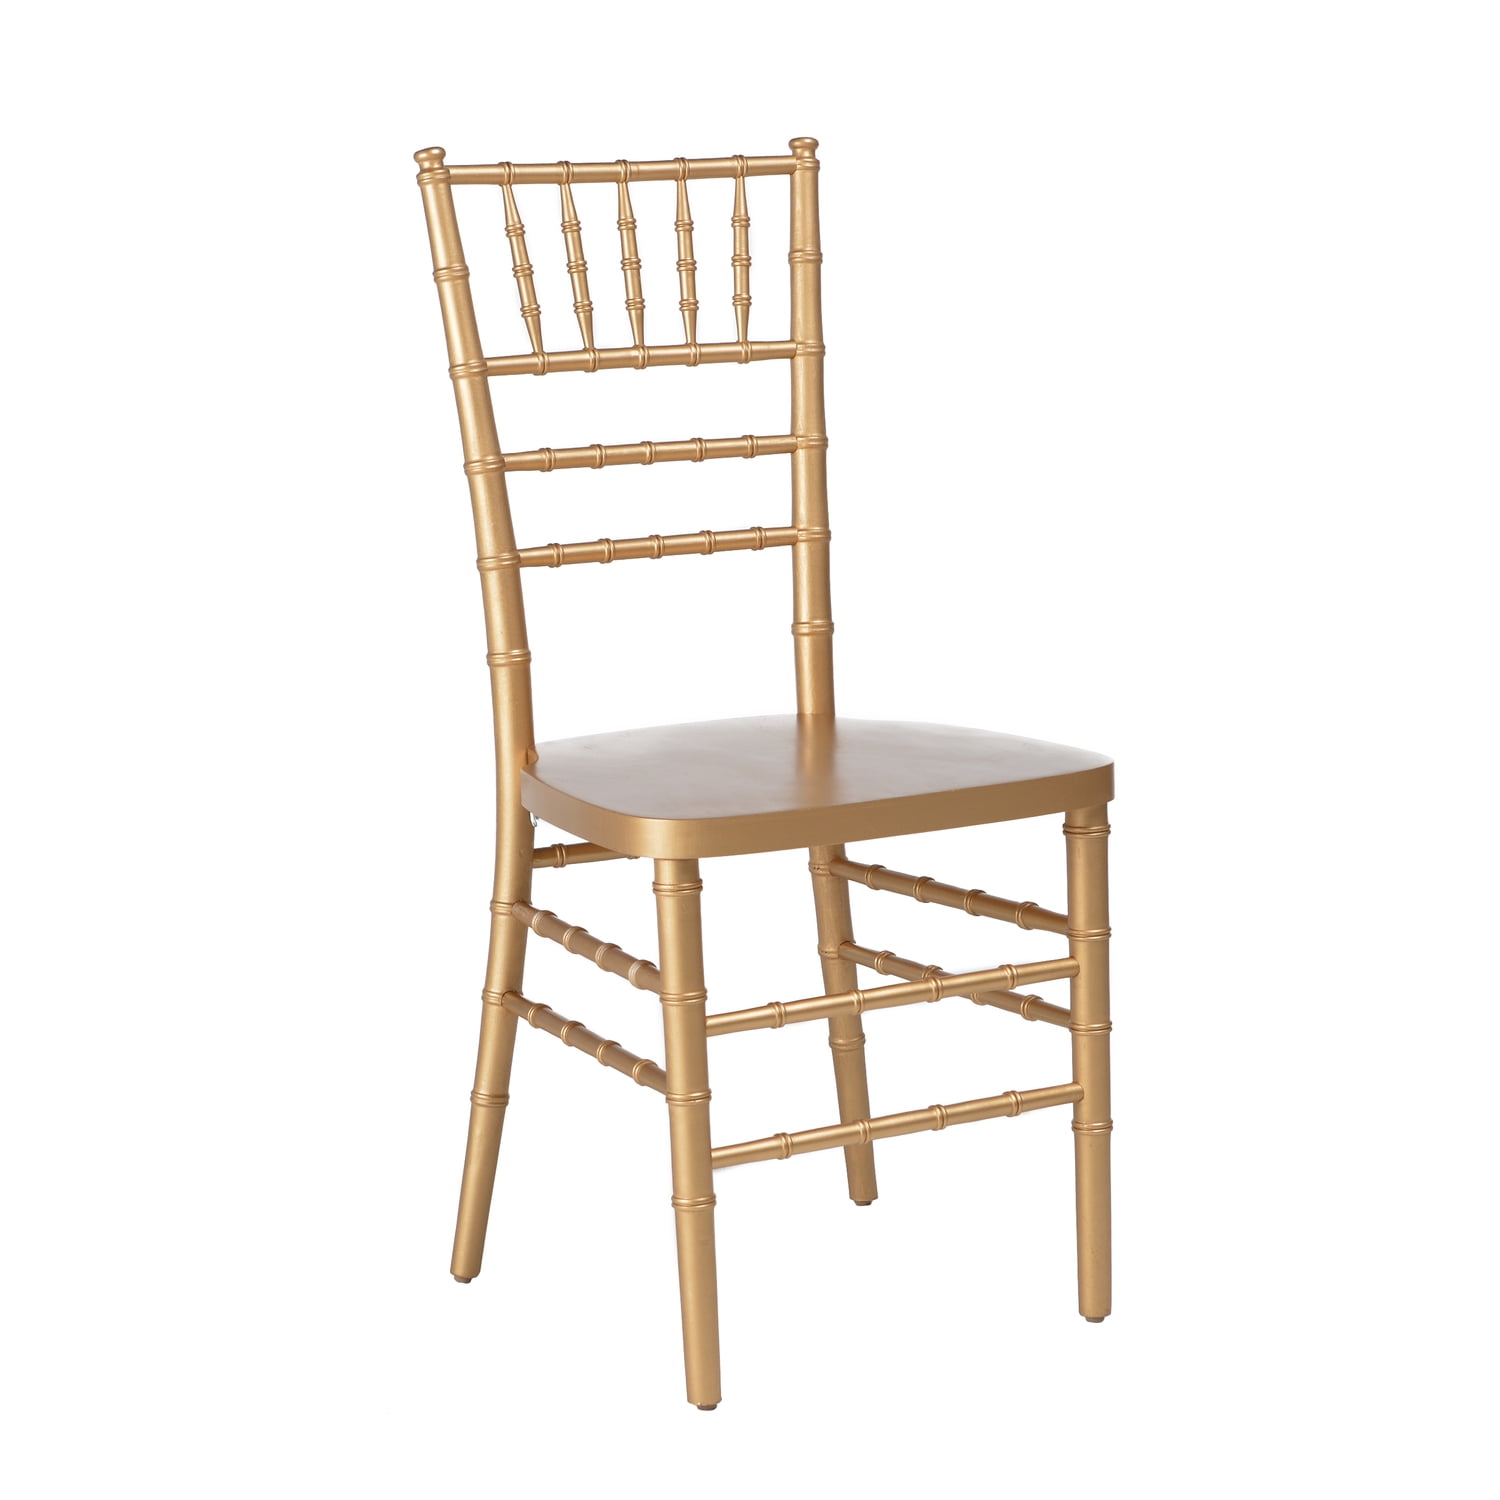 B-201-gl-web2 American Classic European Solid Gold Wood Dining Chair, Set Of 2 - 36 X 16 X 15 In.